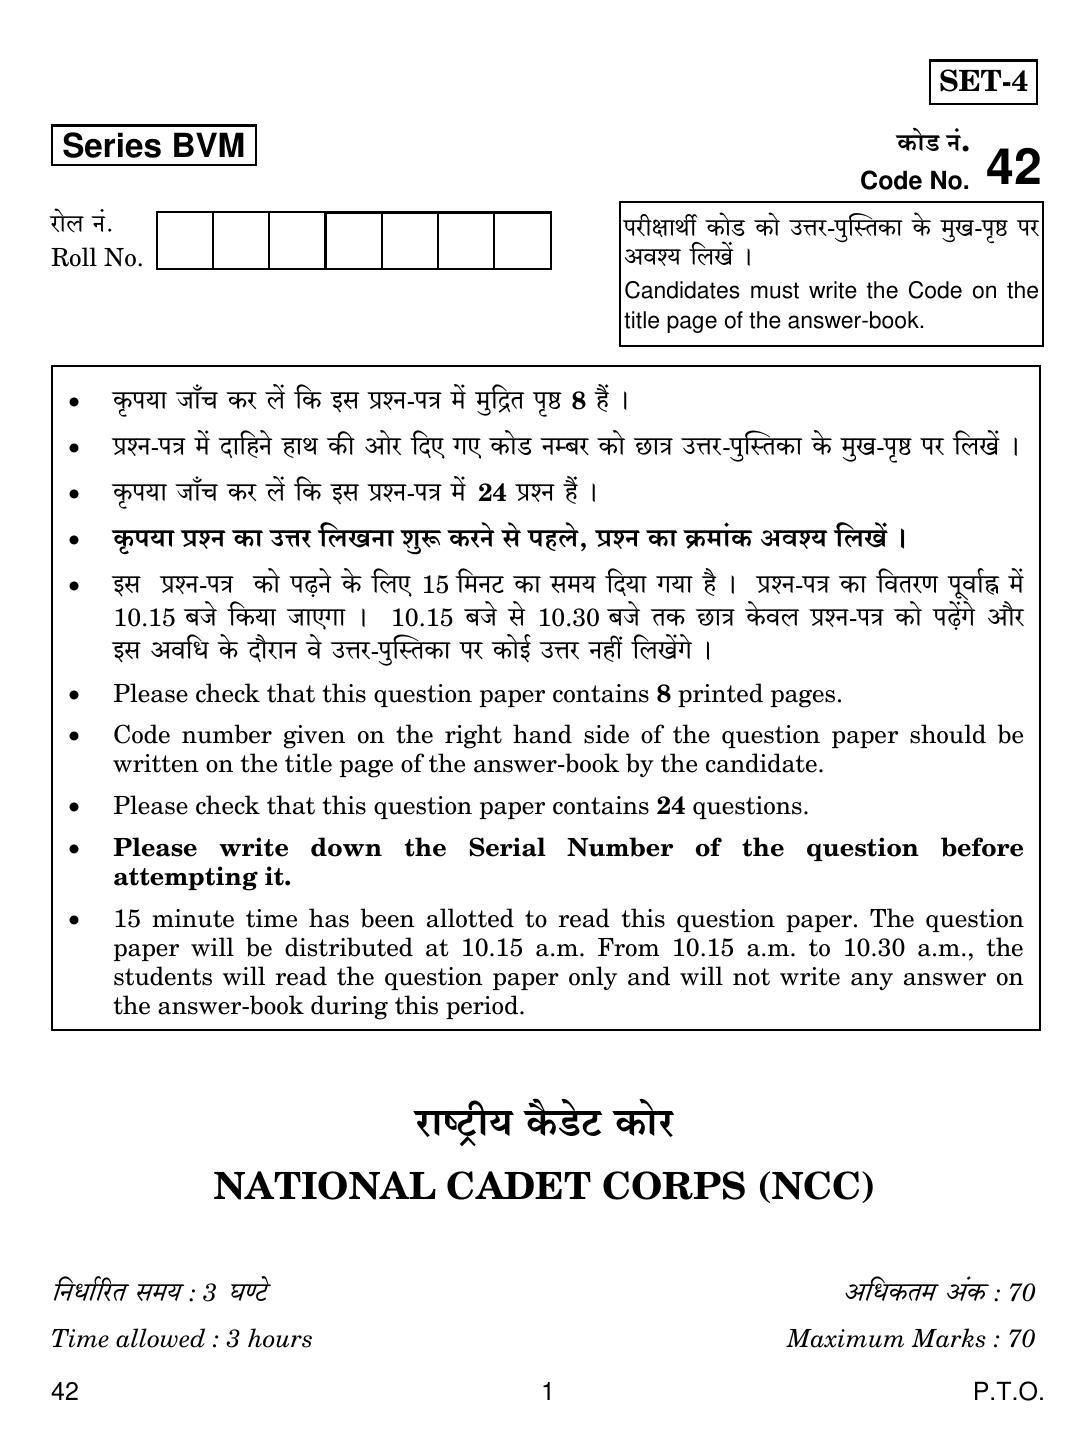 CBSE Class 12 42 National Cadet Corps (NCC) 2019 Question Paper - Page 1